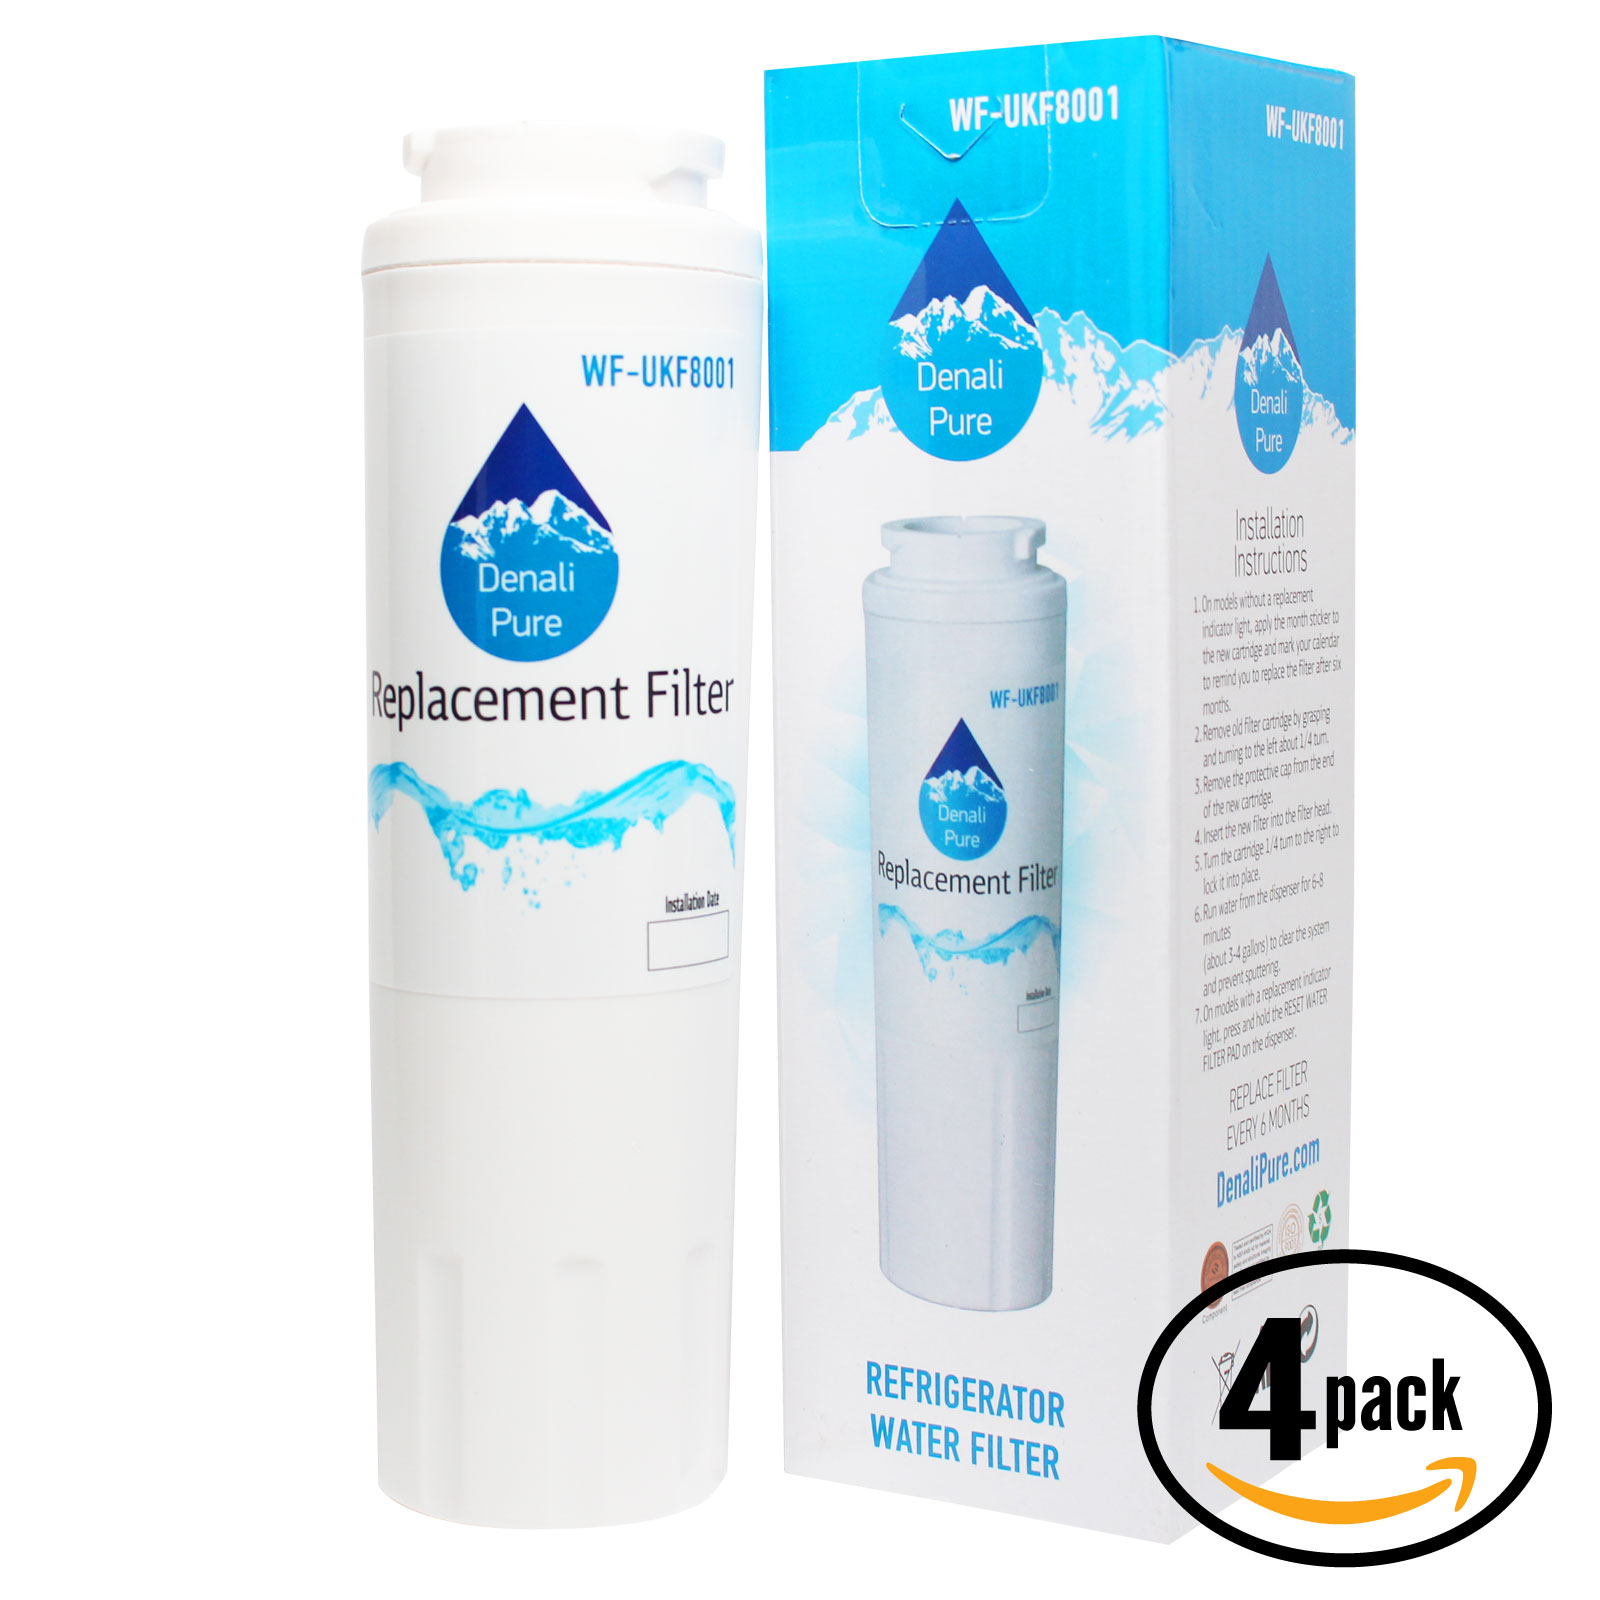 4-Pack Replacement for KitchenAid KFIS25XVMS2 Refrigerator Water Filter - Compatible with KitchenAid 4396395 Fridge Water Filter Cartridge - image 1 of 4